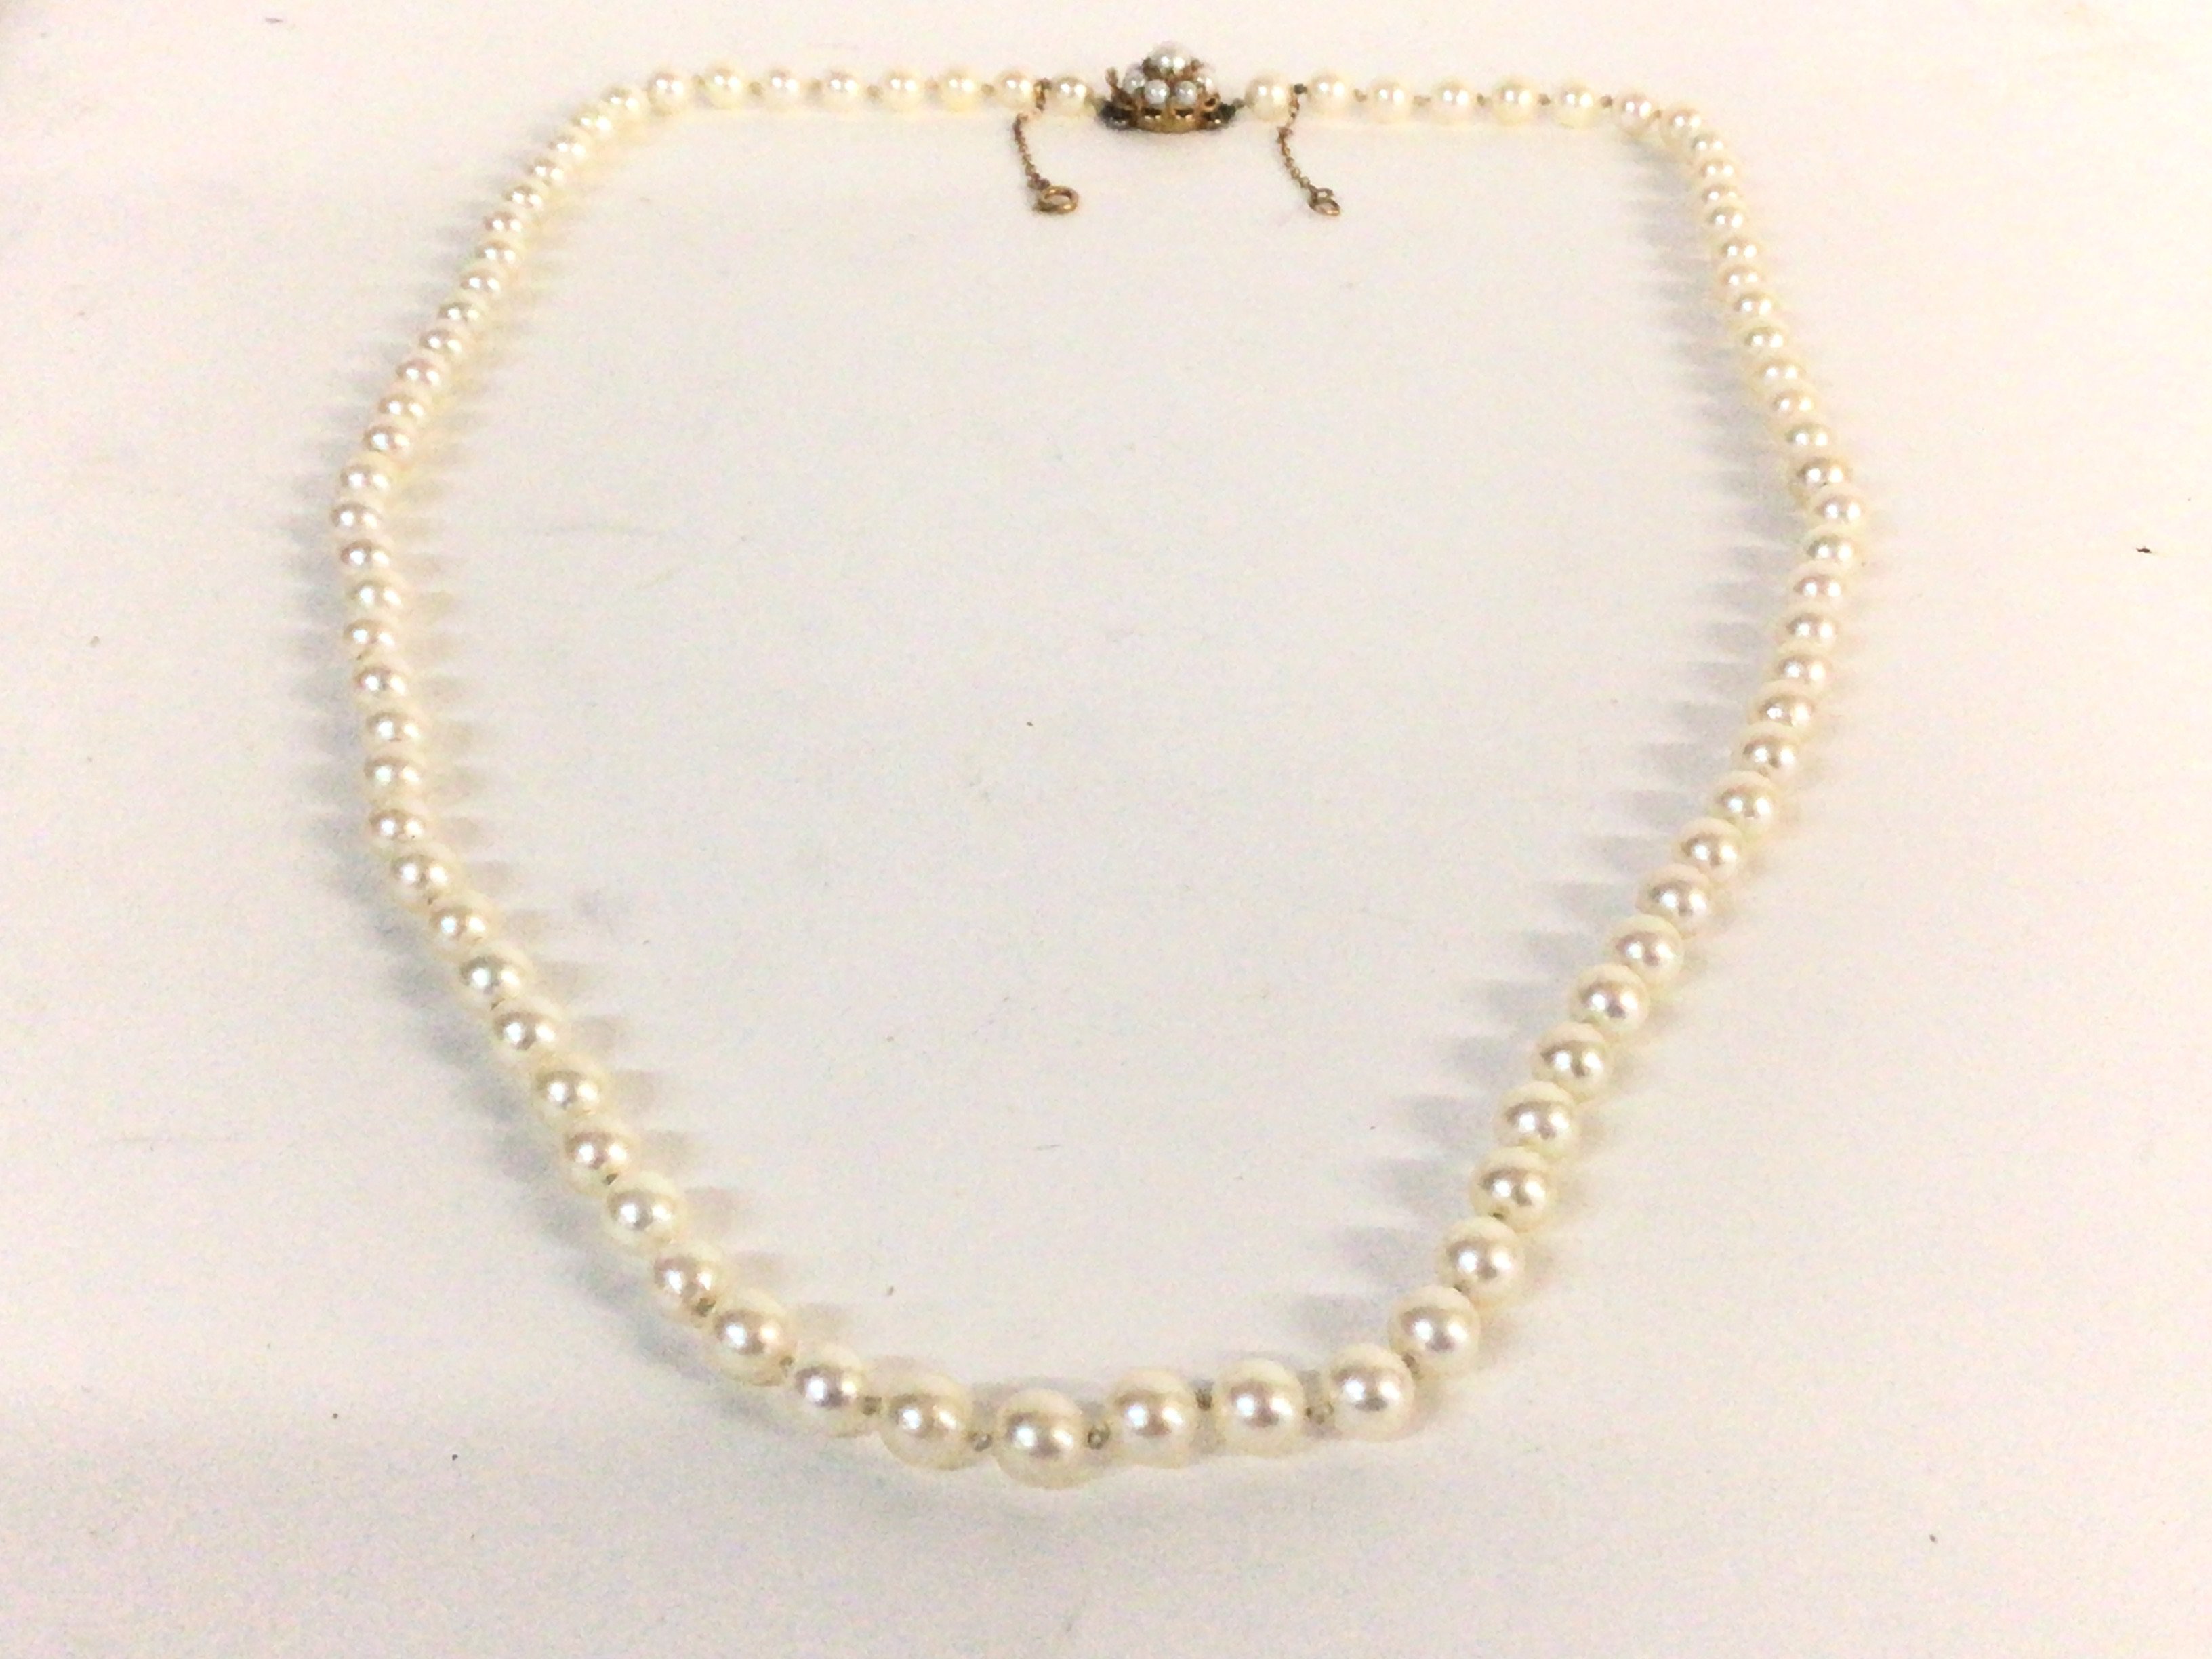 A string of cultured pearls with a 9ct gold clasp